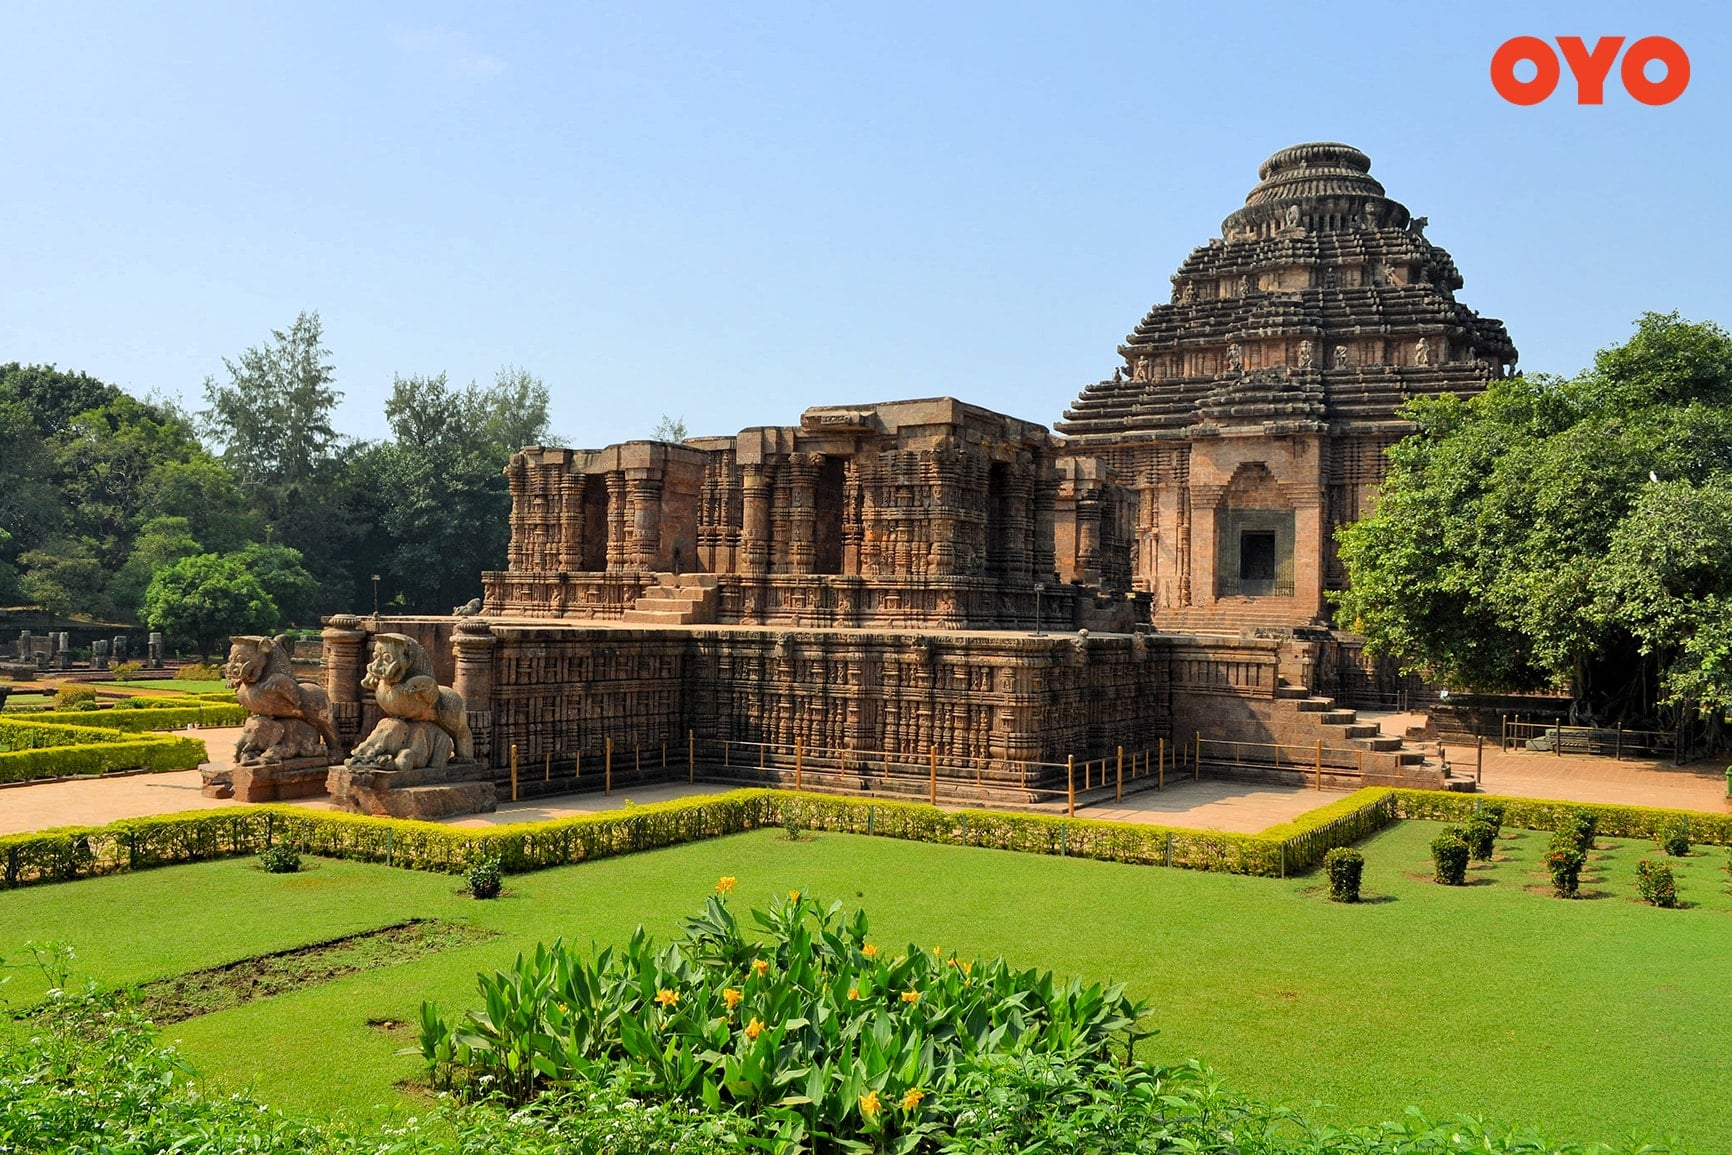 Konark Temple, Odisha - one of the most famous historical buildings in India